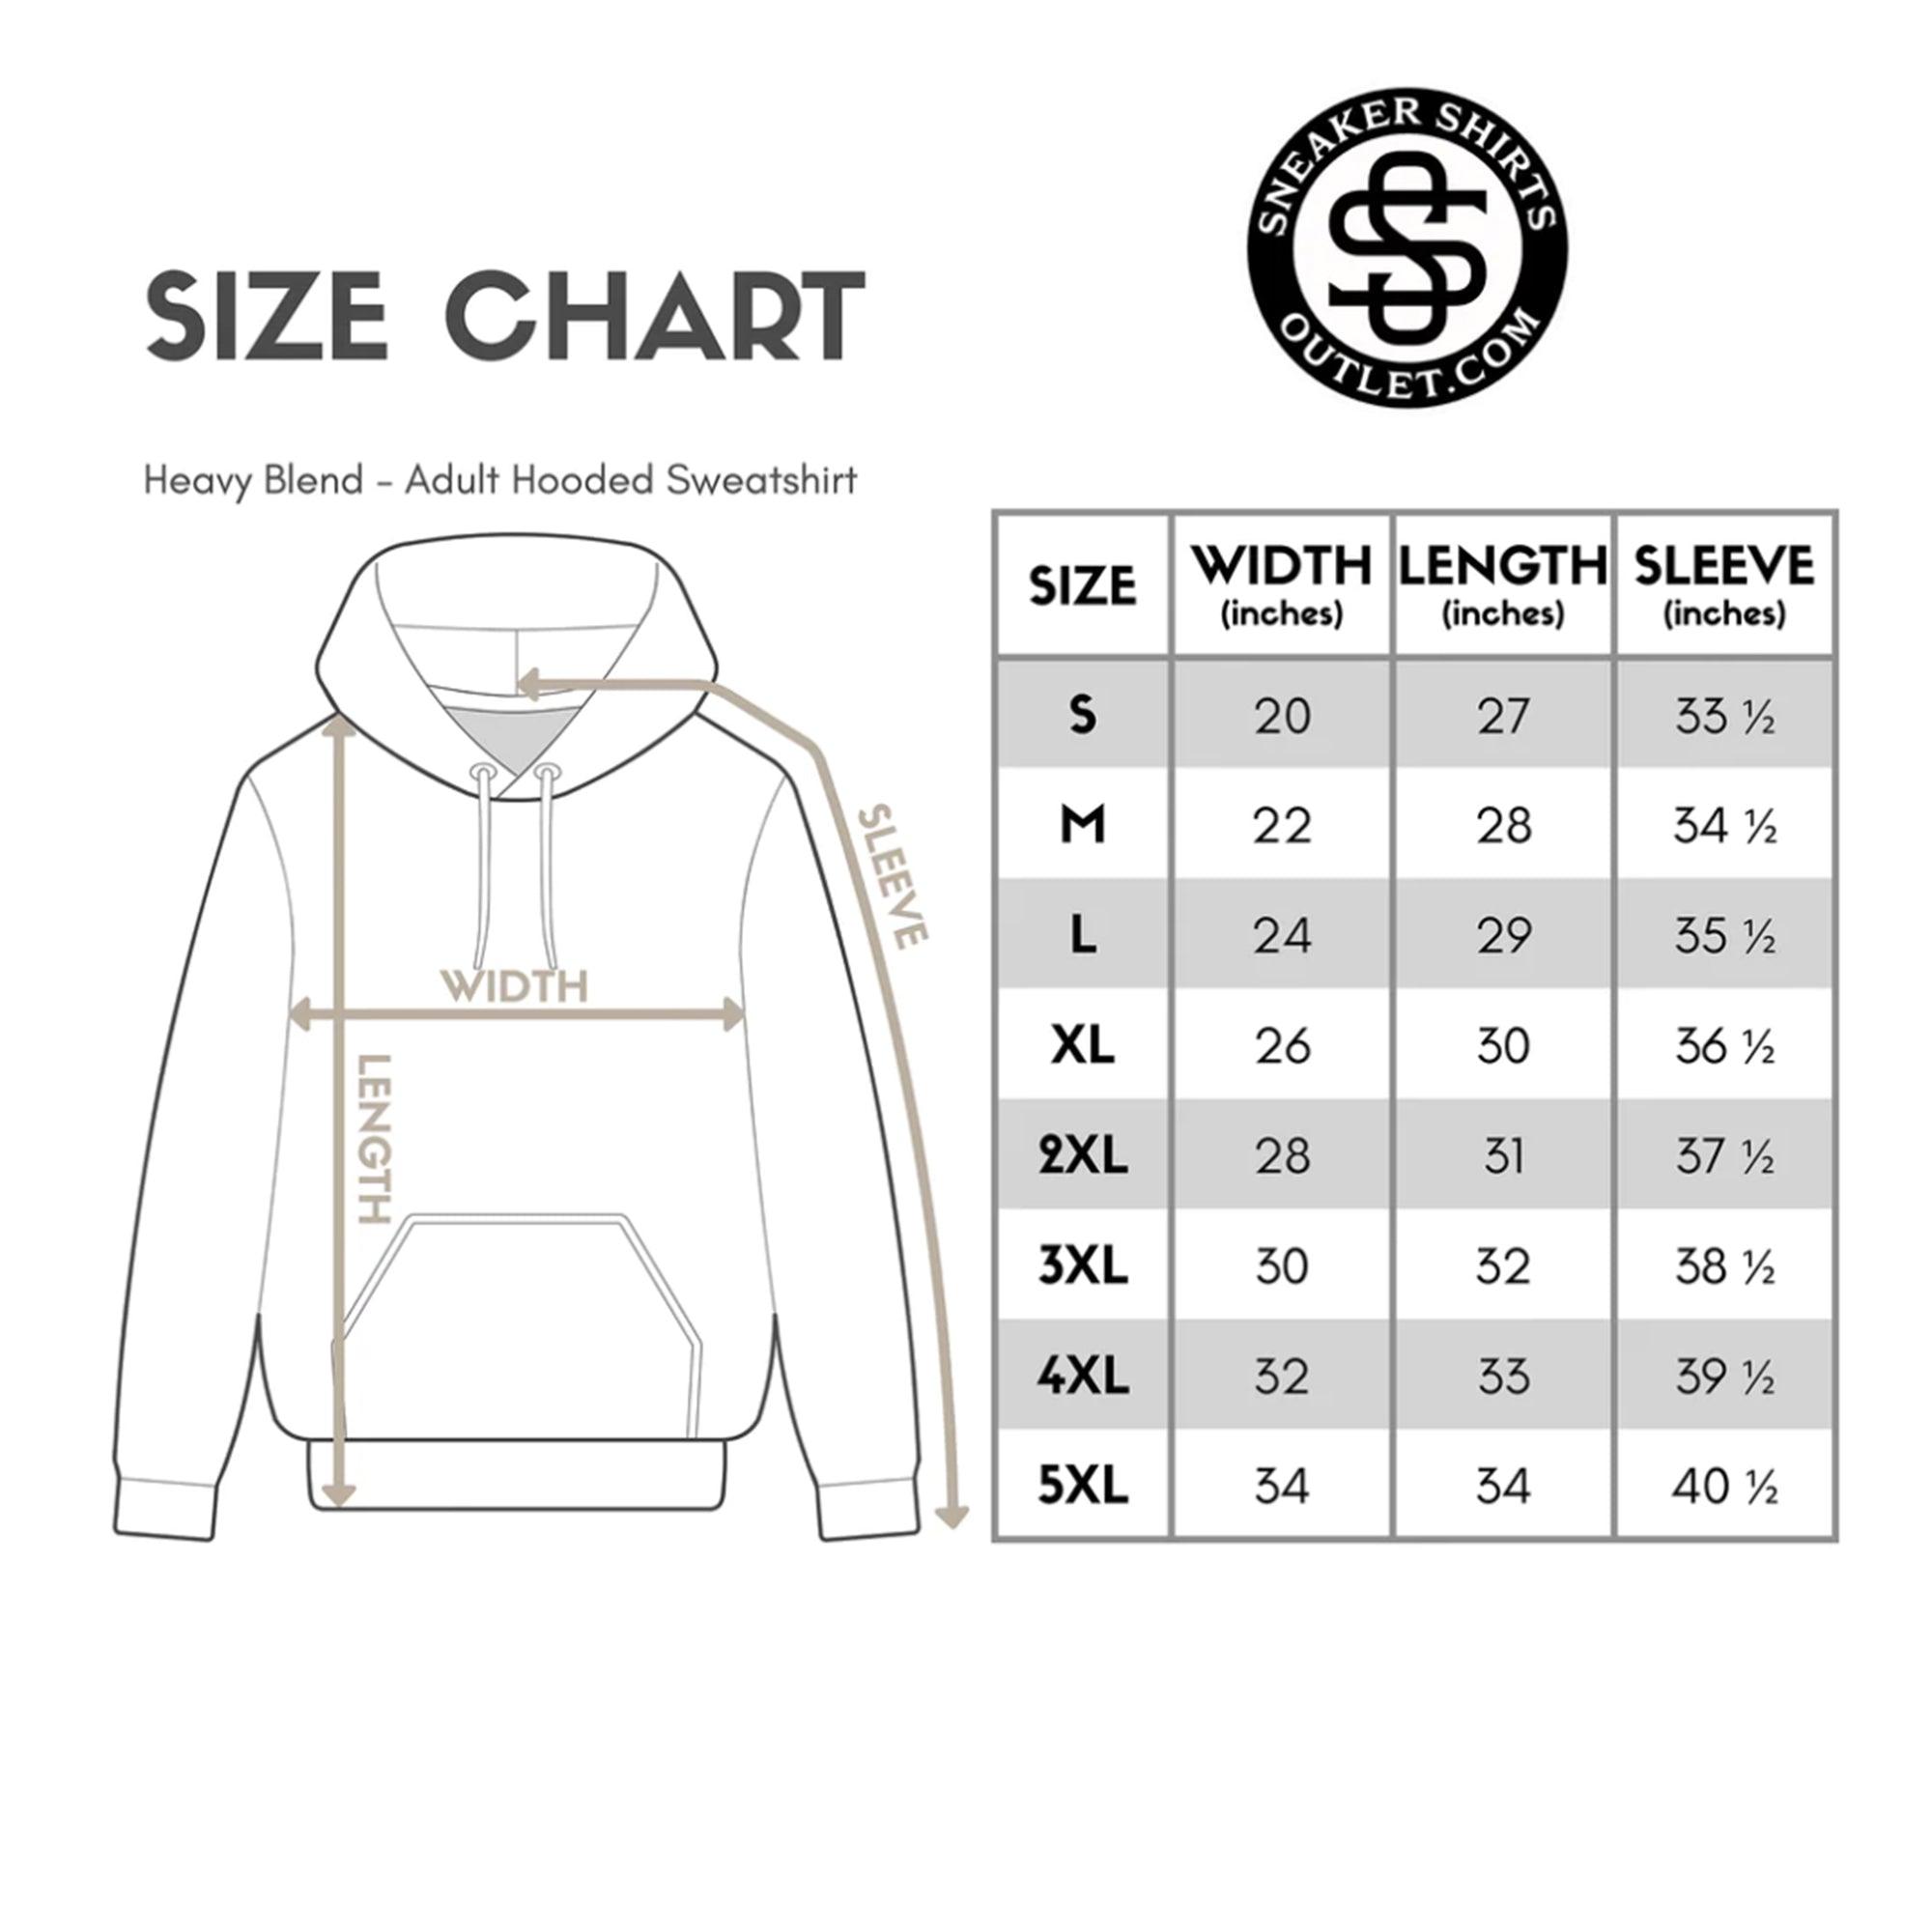 size chart for Lover Hoodie Yeezy Boost 350 V2 Dazzling Blue photo